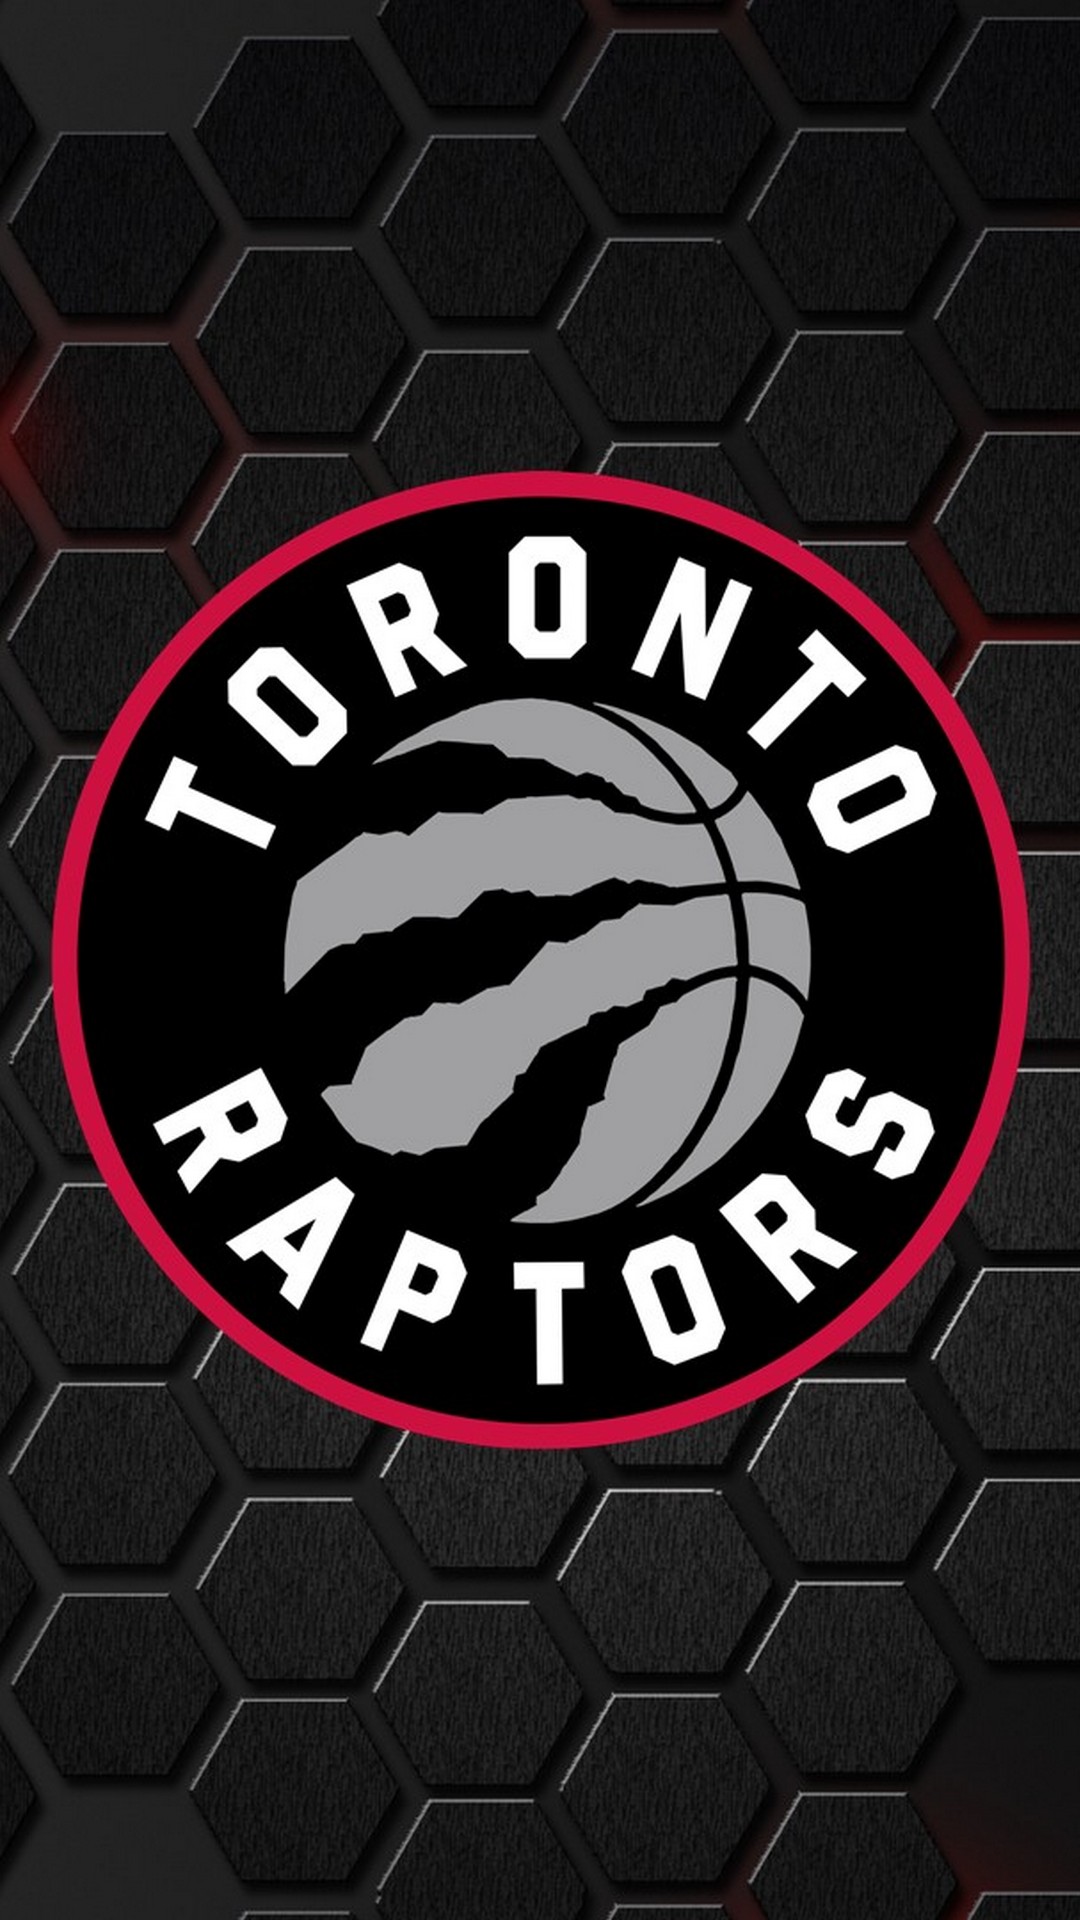 iPhone Wallpaper Toronto Raptors with image resolution 1080x1920 pixel. You can make this wallpaper for your iPhone 5, 6, 7, 8, X backgrounds, Mobile Screensaver, or iPad Lock Screen